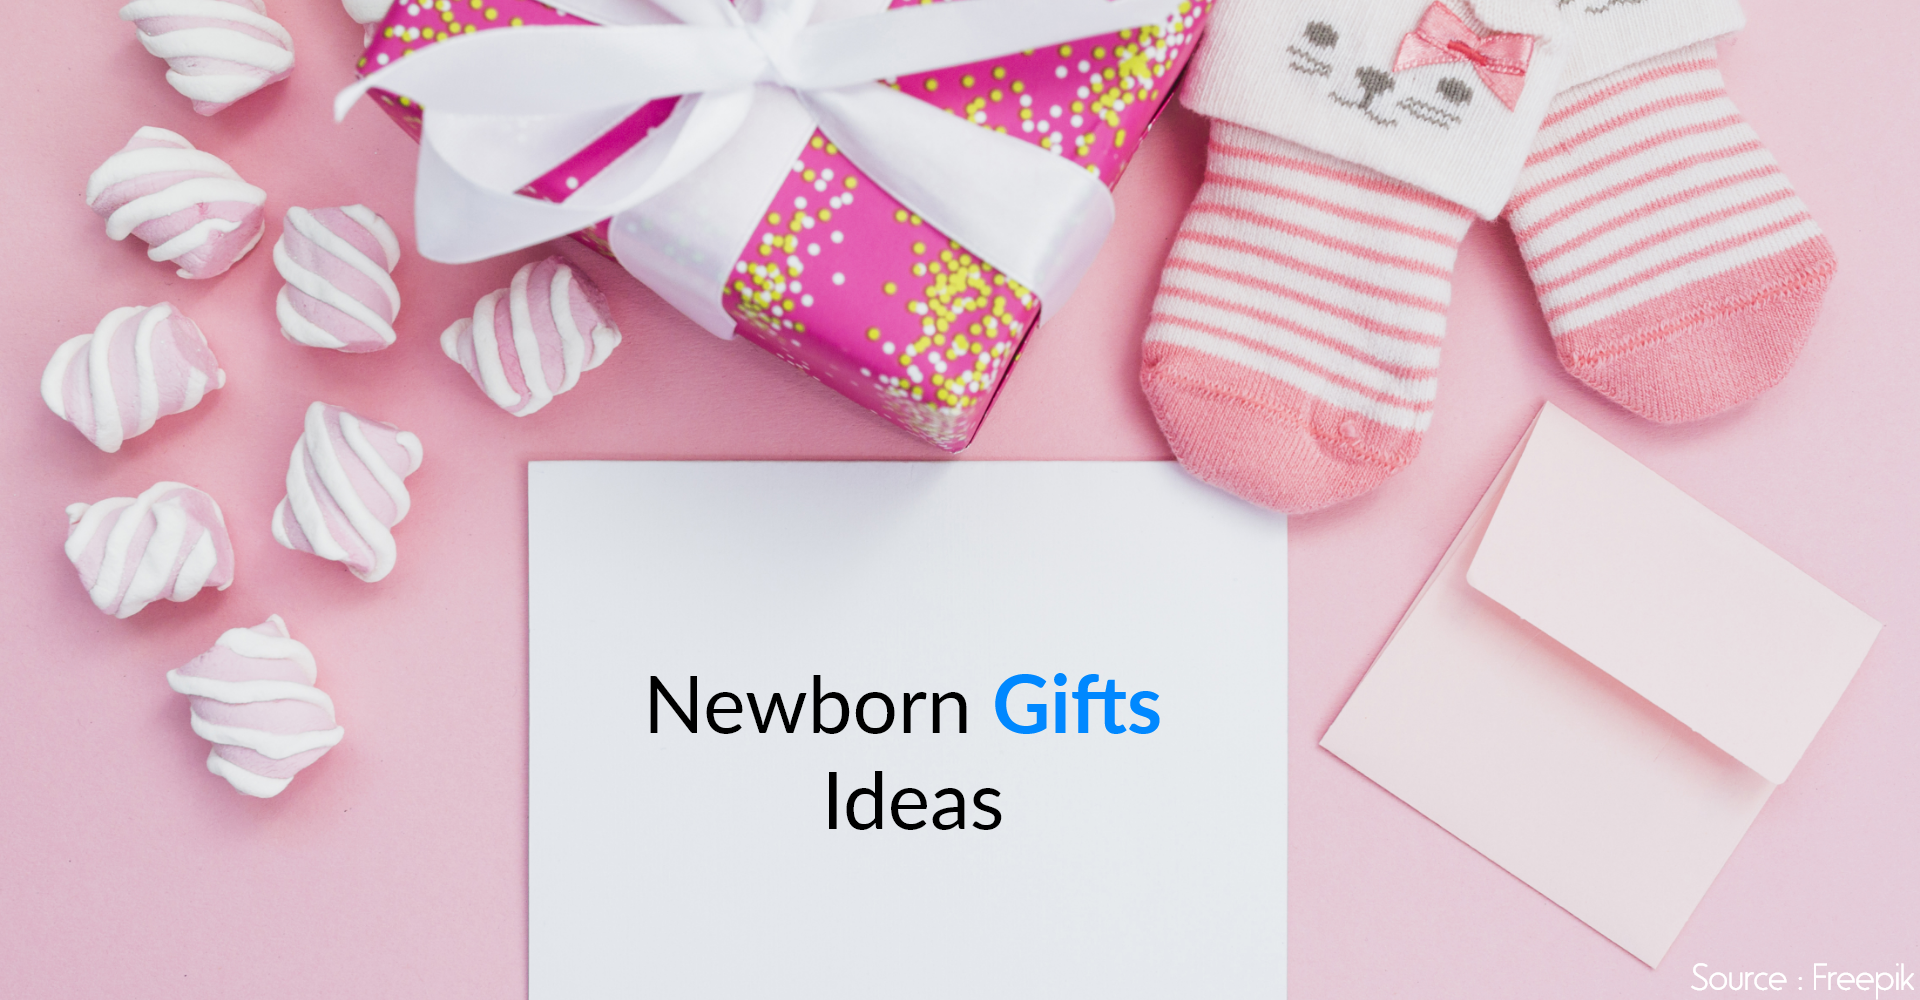 Top 10 Newborn Gifts Ideas For Your Baby